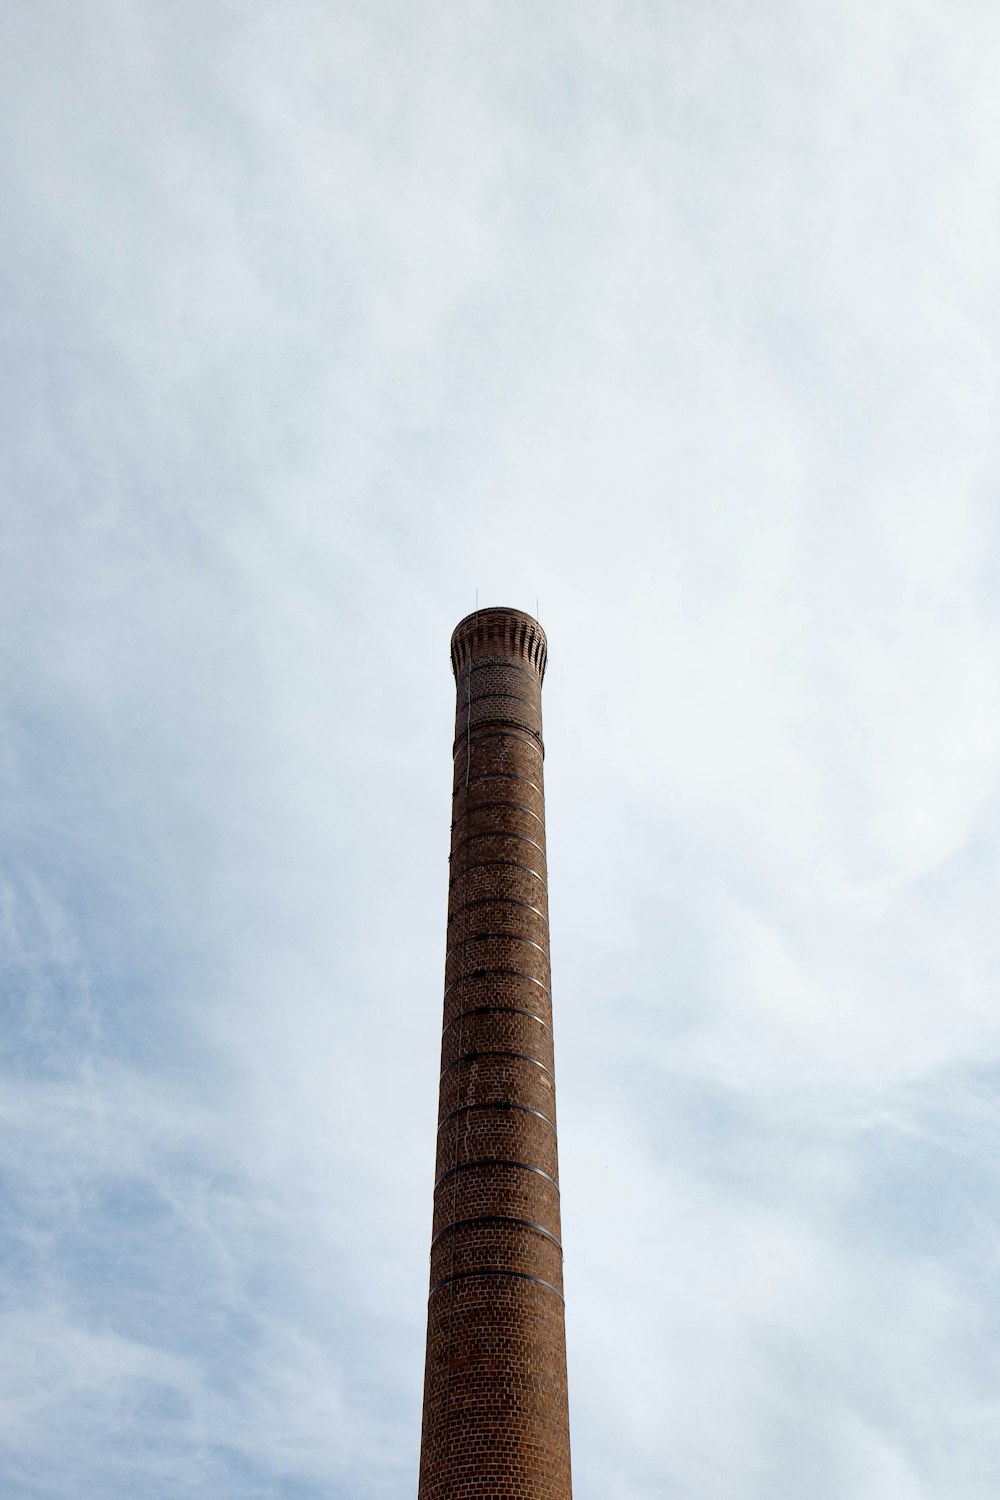 brown concrete tower under white clouds during daytime